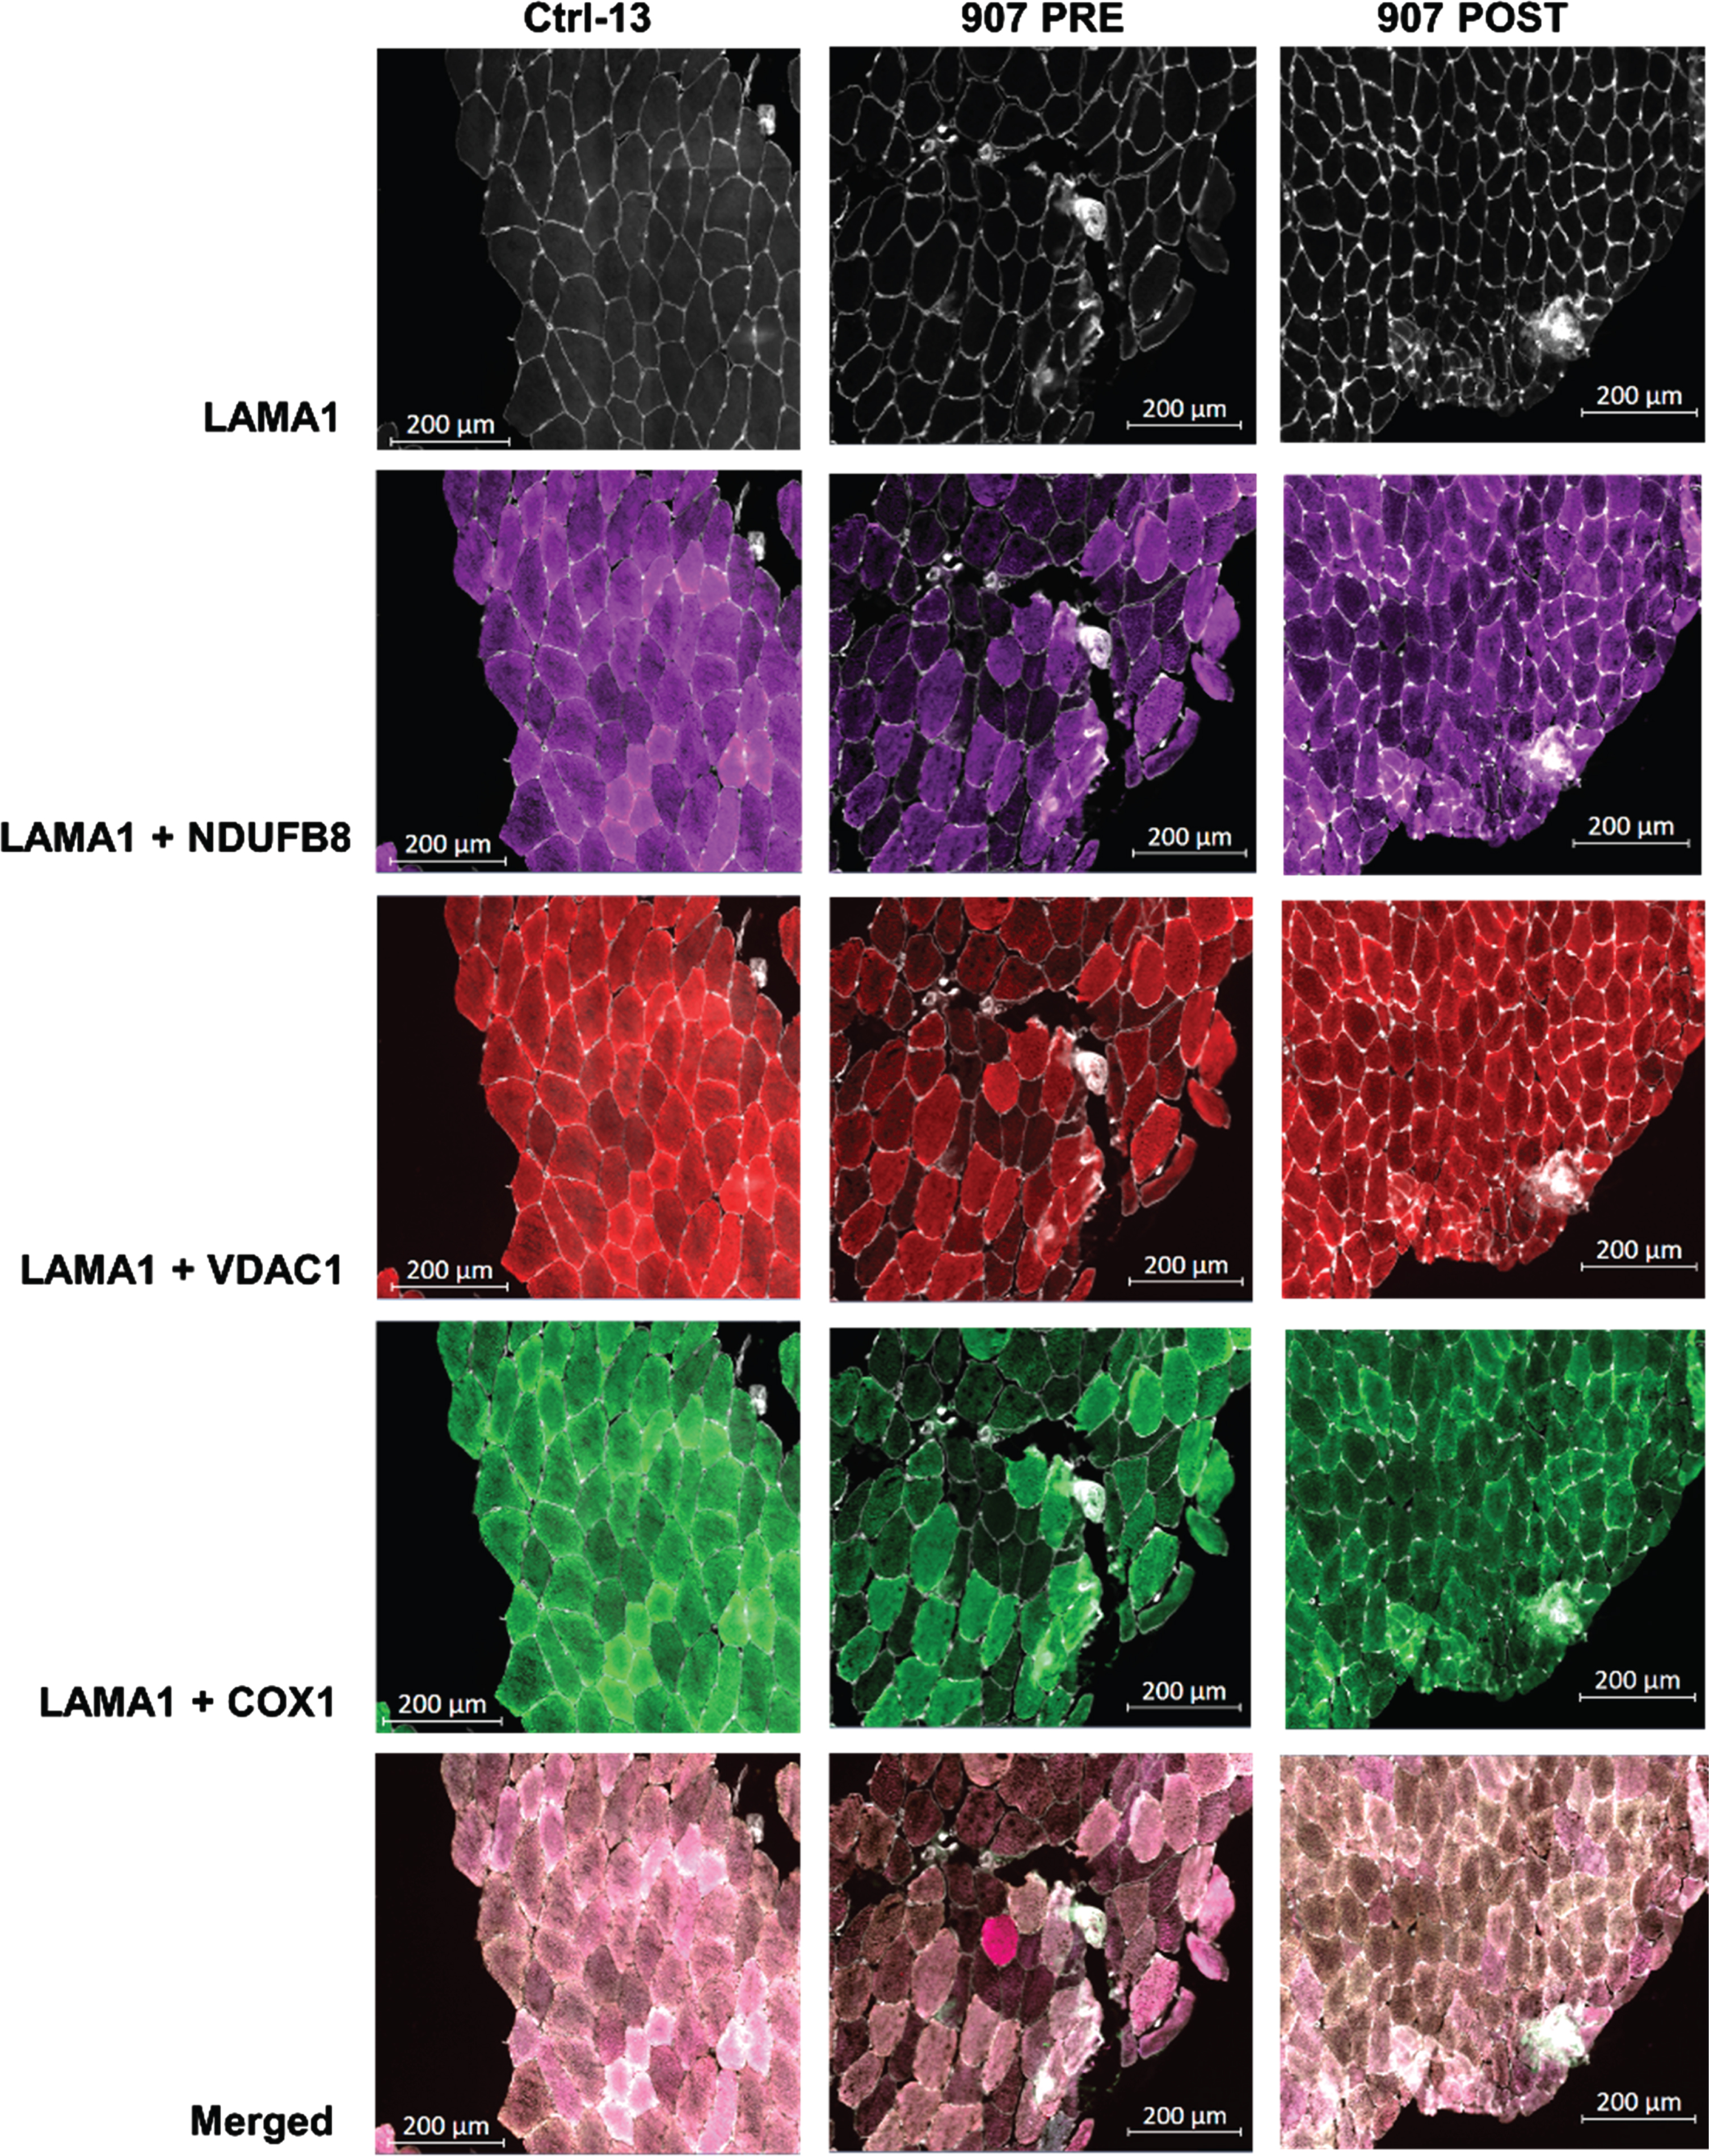 Representative QIF images of control subject, pre- and post-exercise pair from DM1 cohort after resistance exercise training. Representative images of quadruple immunofluorescence staining for LAMA1 (membrane marker), VDAC1 (mitochondrial mass marker), NDUFB8 (complex I marker) and COX1 (complex IV marker) in SKM sections from healthy Ctrl-13, P907 PRE (pre-exercise) and P907 POST (post-exercise) biopsies. The last row is the merge of all channels.